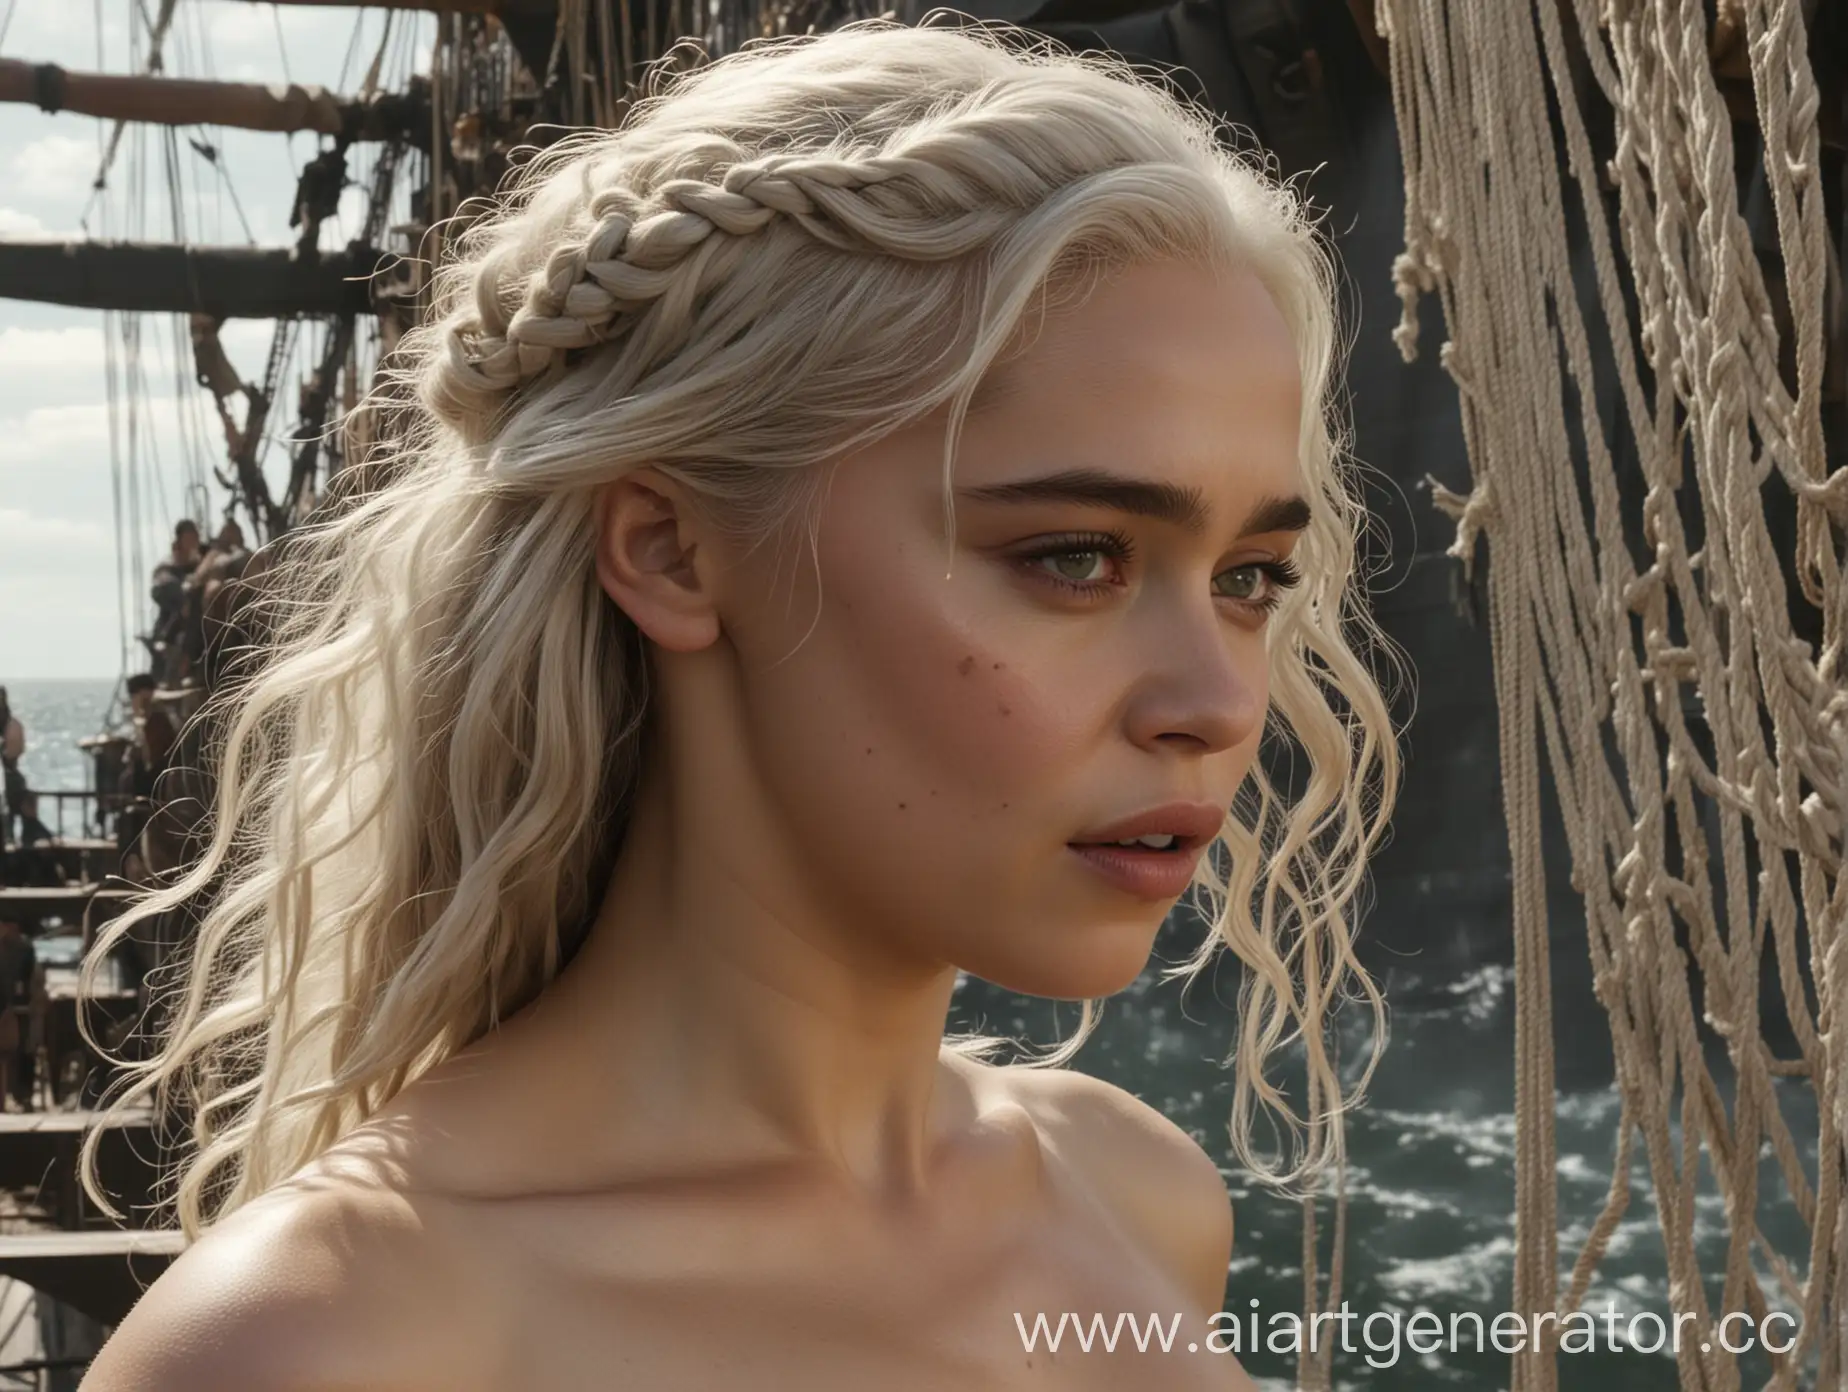 Completely naked, completely naked, full-length profile view, the beautiful actress Emilia Clarke in the image of Daenerys Targaryen climbs the stairs on board a sailing ship. Her hair is blowing in the wind, her skin is smeared with soot, her buttocks are tense, her breasts are swaying, and there is an expression of superiority on her face. The image is of the best quality. Accurate transmission of all details. A copy of the face. 8K. HD.